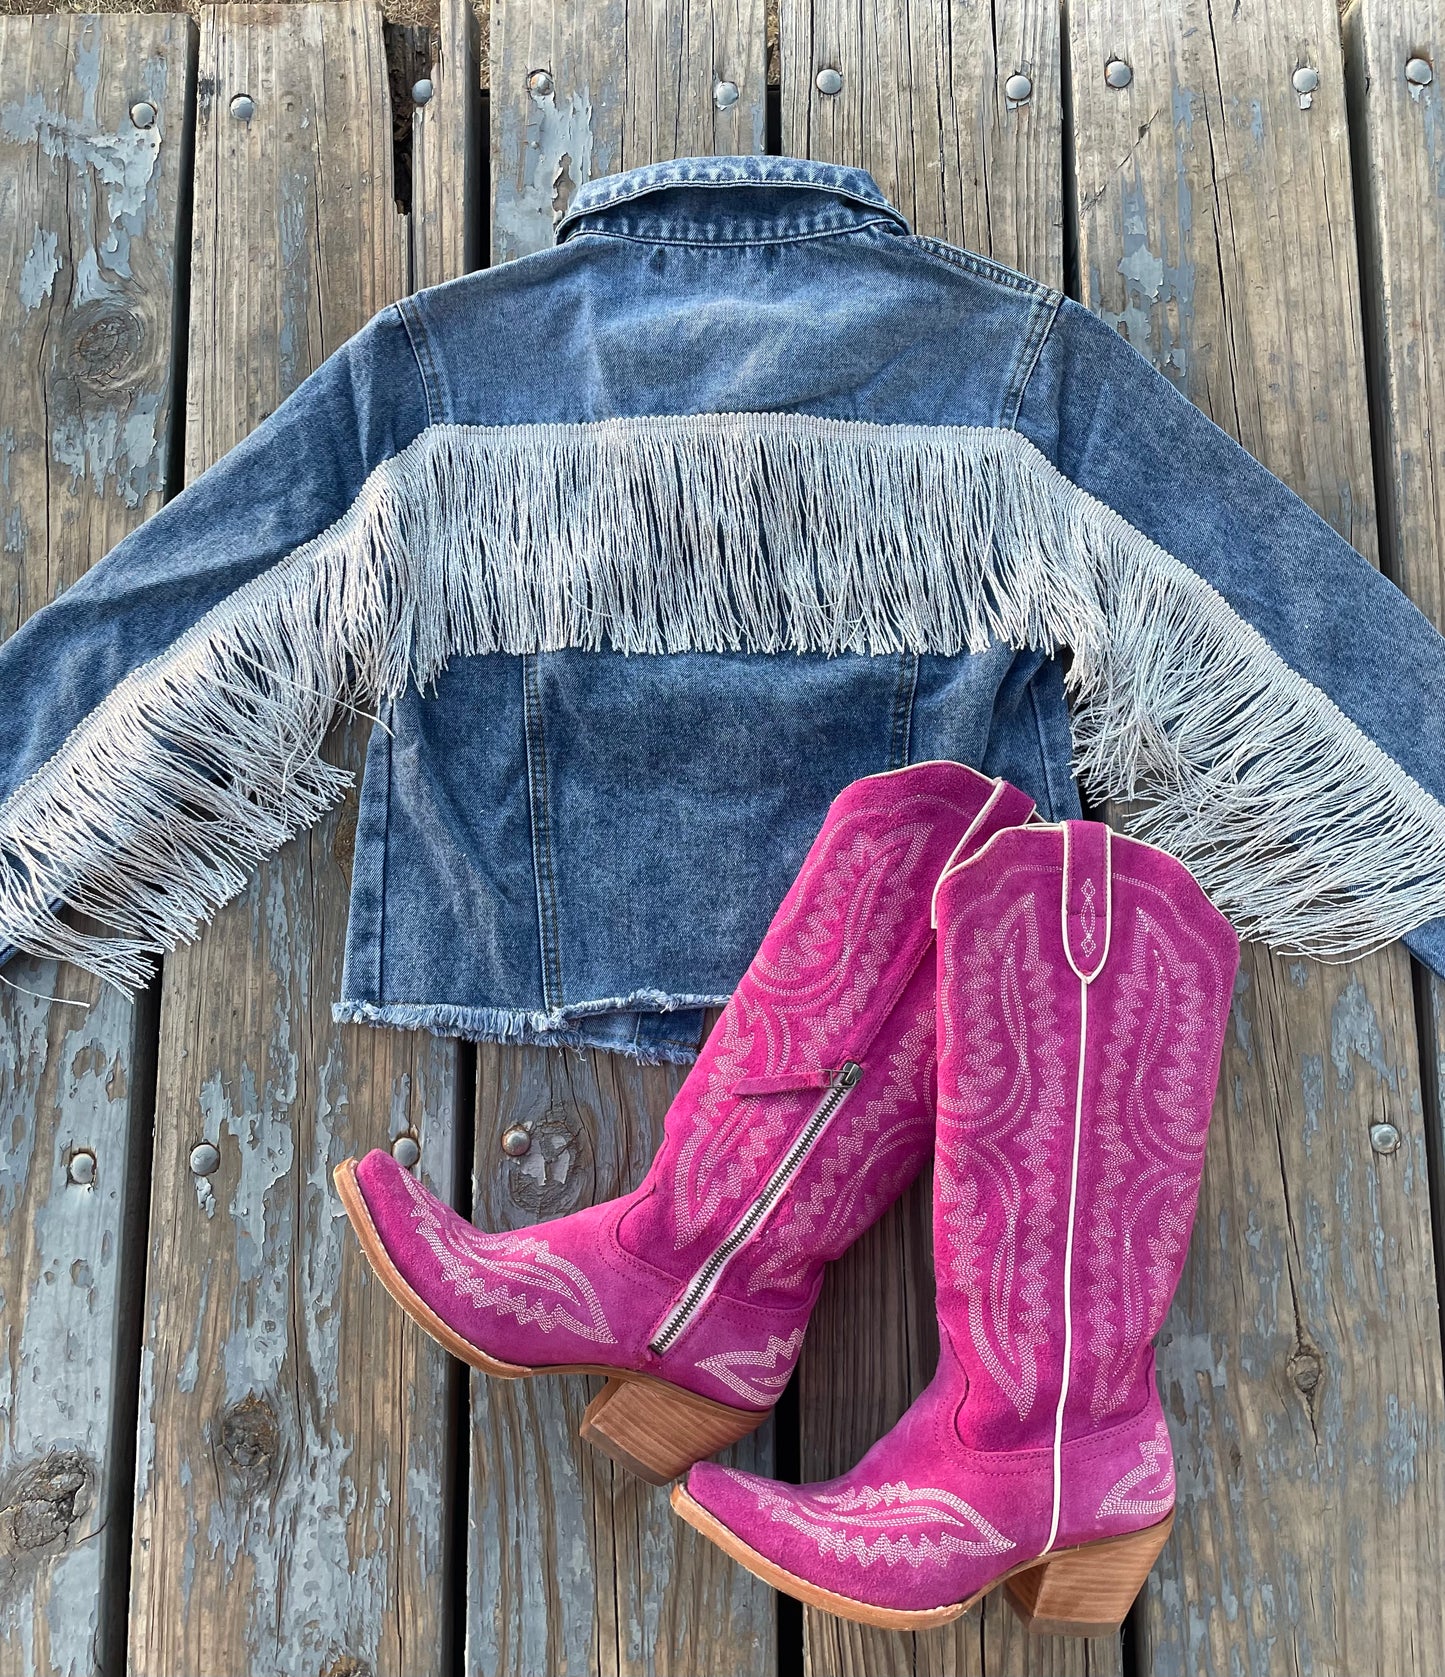 The Disco Cowgirl Jacket